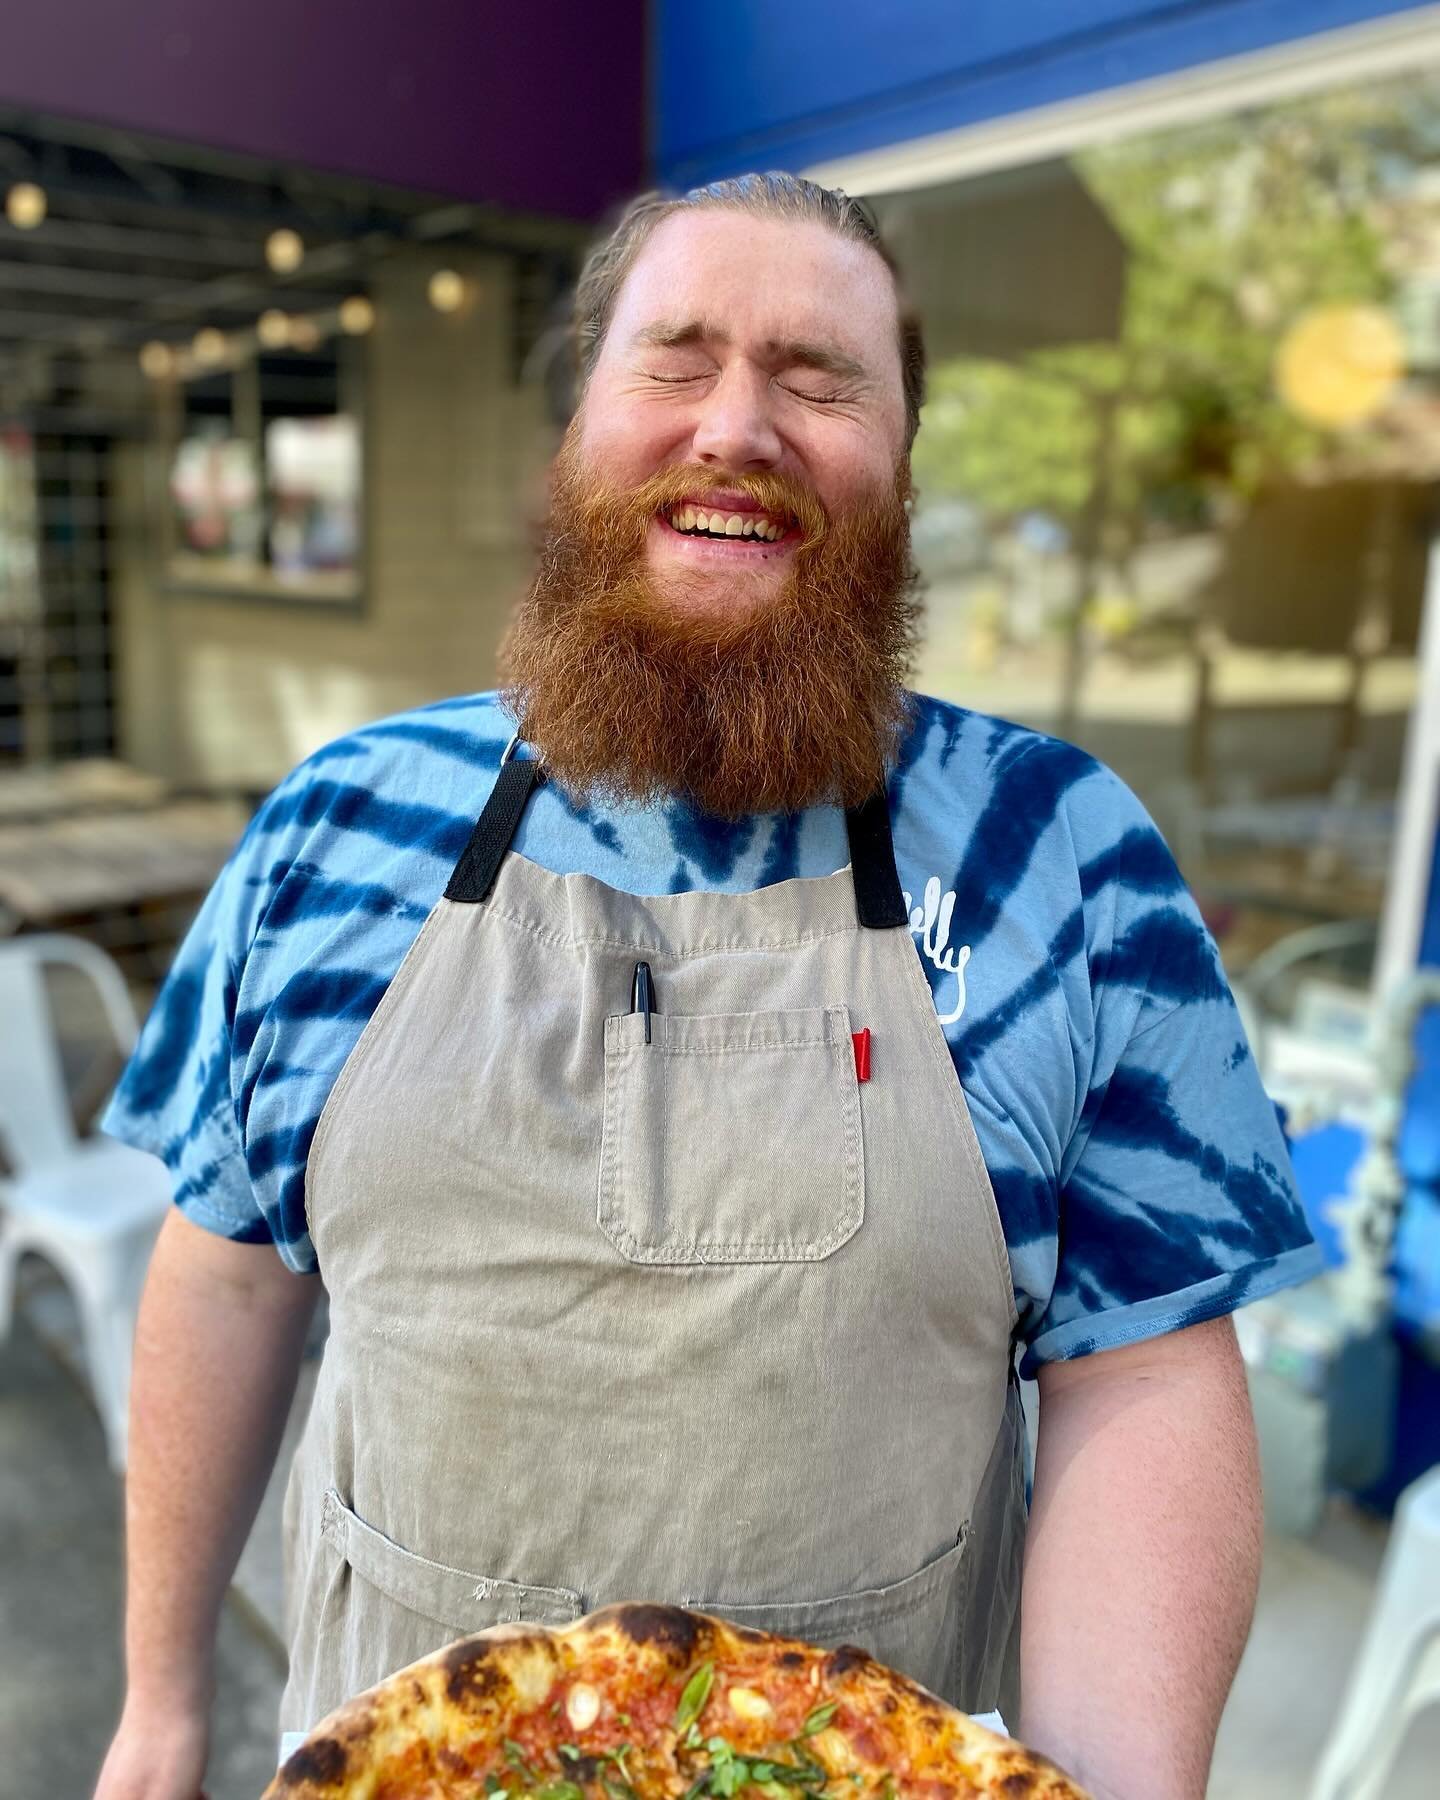 Friday night special is Ethan @thahomieeb is back and ready to cook you some awesome food! 

We got pies, pasta, and veggies for ya!  See ya soon.

Filled Pasta special tomorrow night stay tuned.